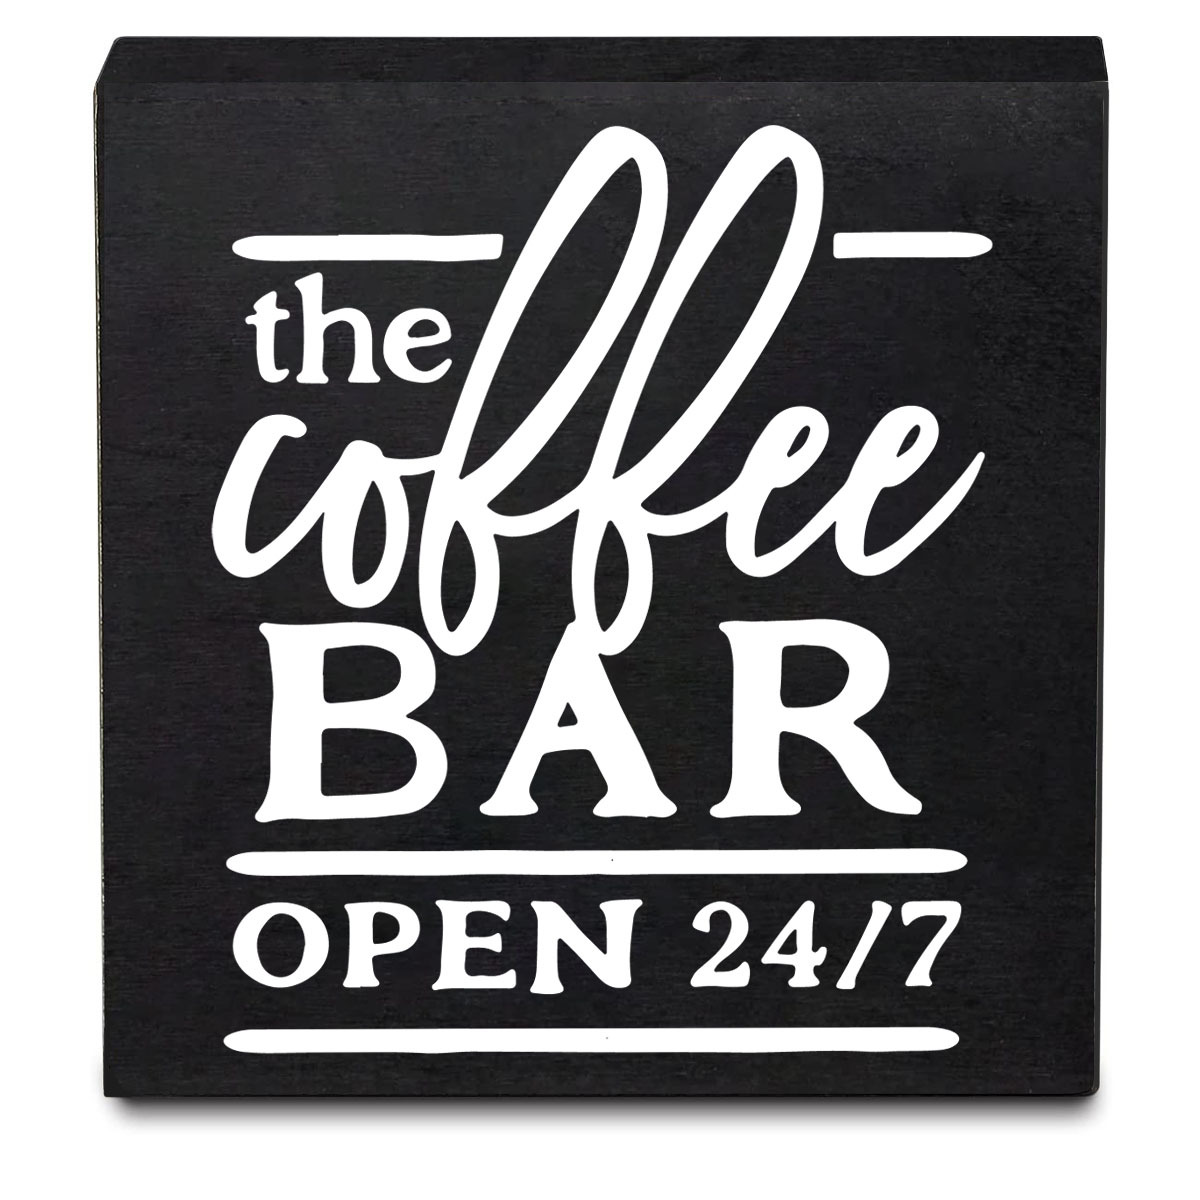 

1pc, Funny Coffee Wooden Box Sign Desk Decor The Coffee Bar Open 24 Hours Wood Block Plaque Rustic Box Sign For Home Kitchen Shelf Table Decoration